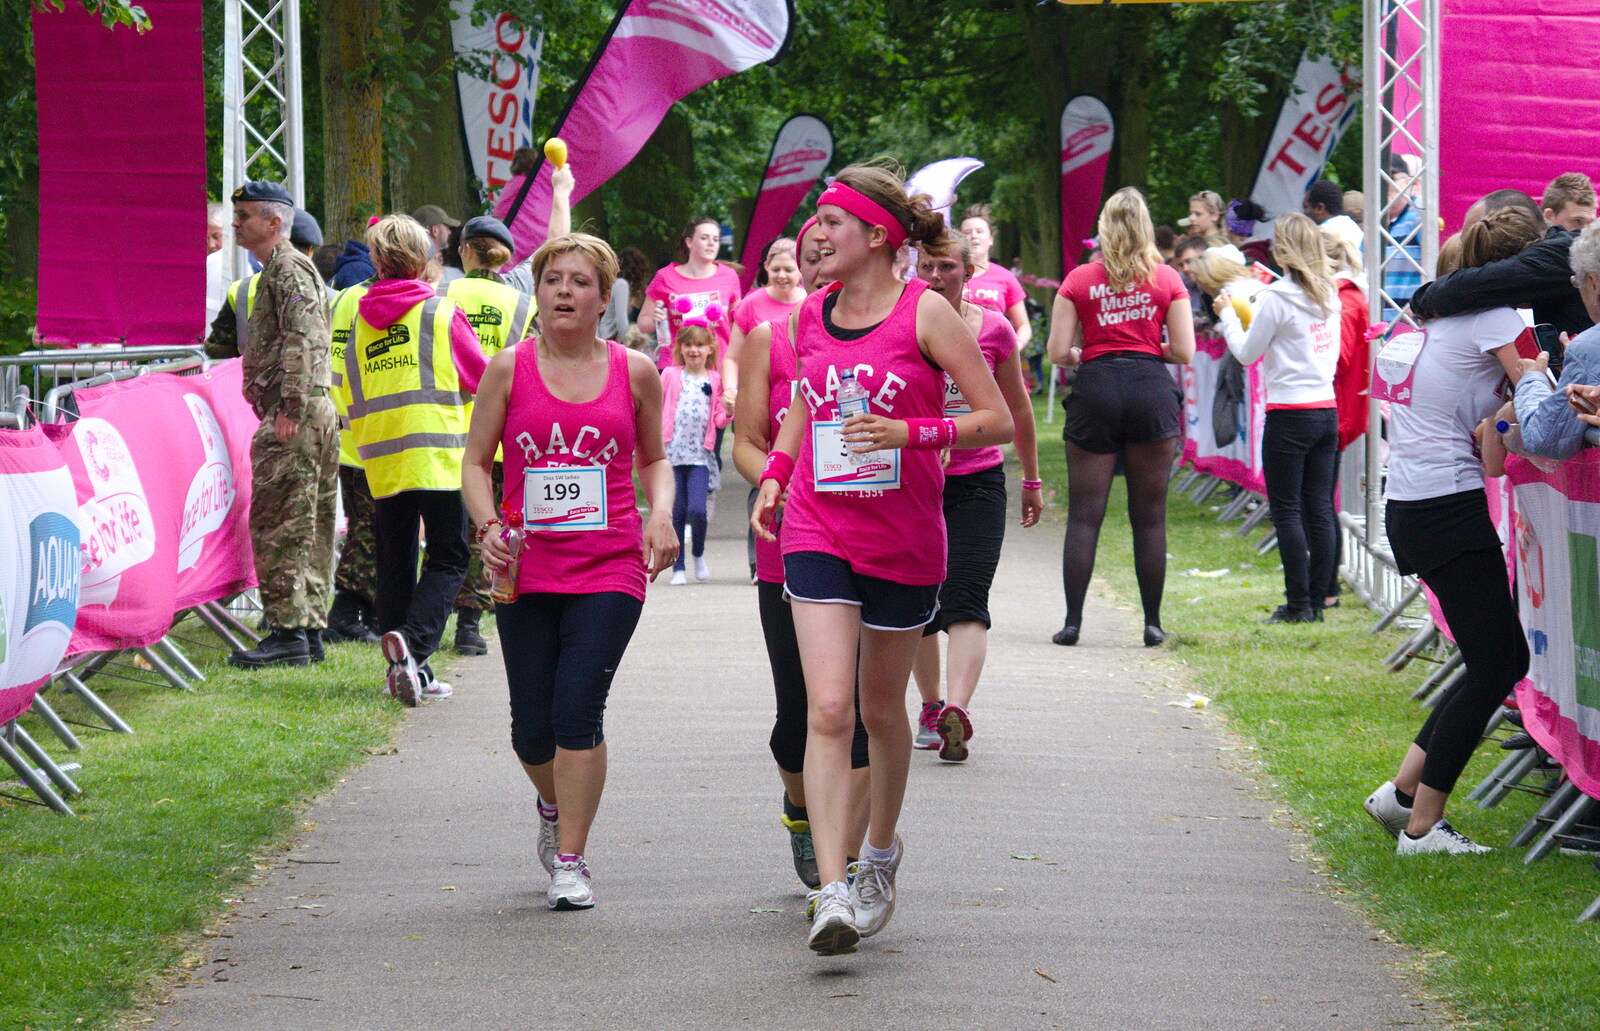 Isobel and the SW Ladies cross the line from Isobel's Race For Life, Chantry Park, Ipswich - 11th June 2014